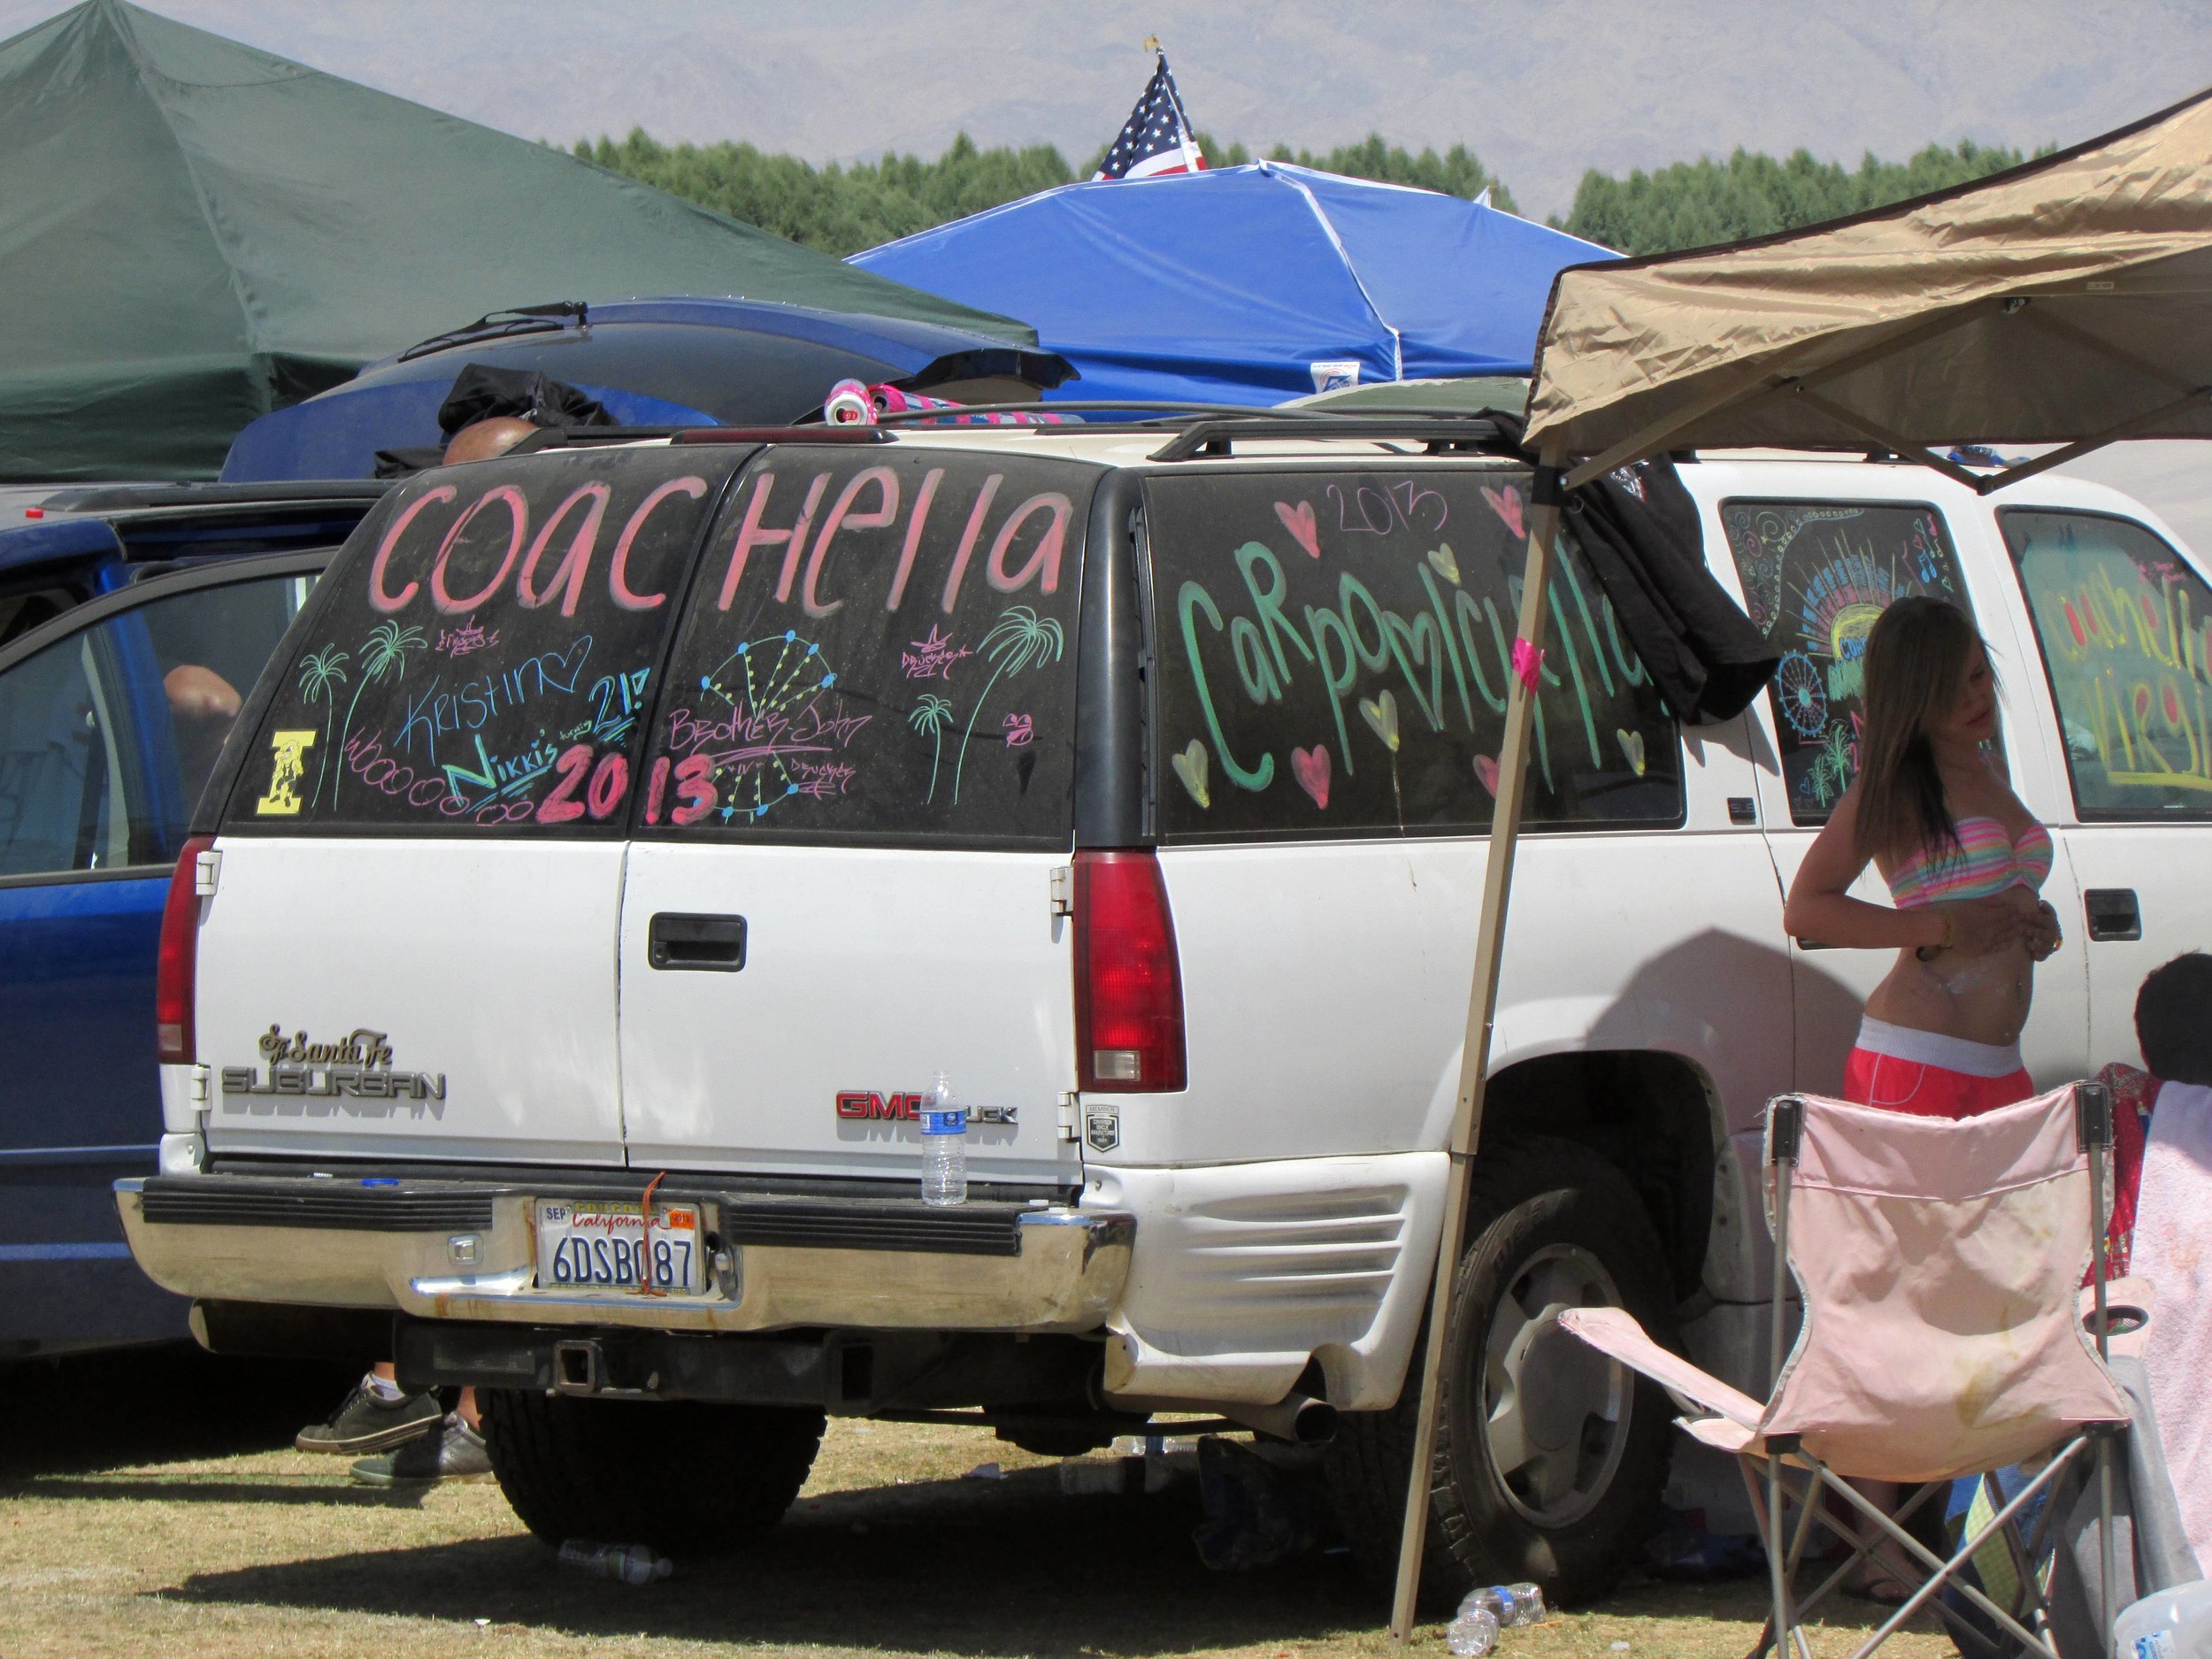 4 - Spotted some entries to Carpoolchella, Coachella's sustainability initiative & ticket lottery.JPG